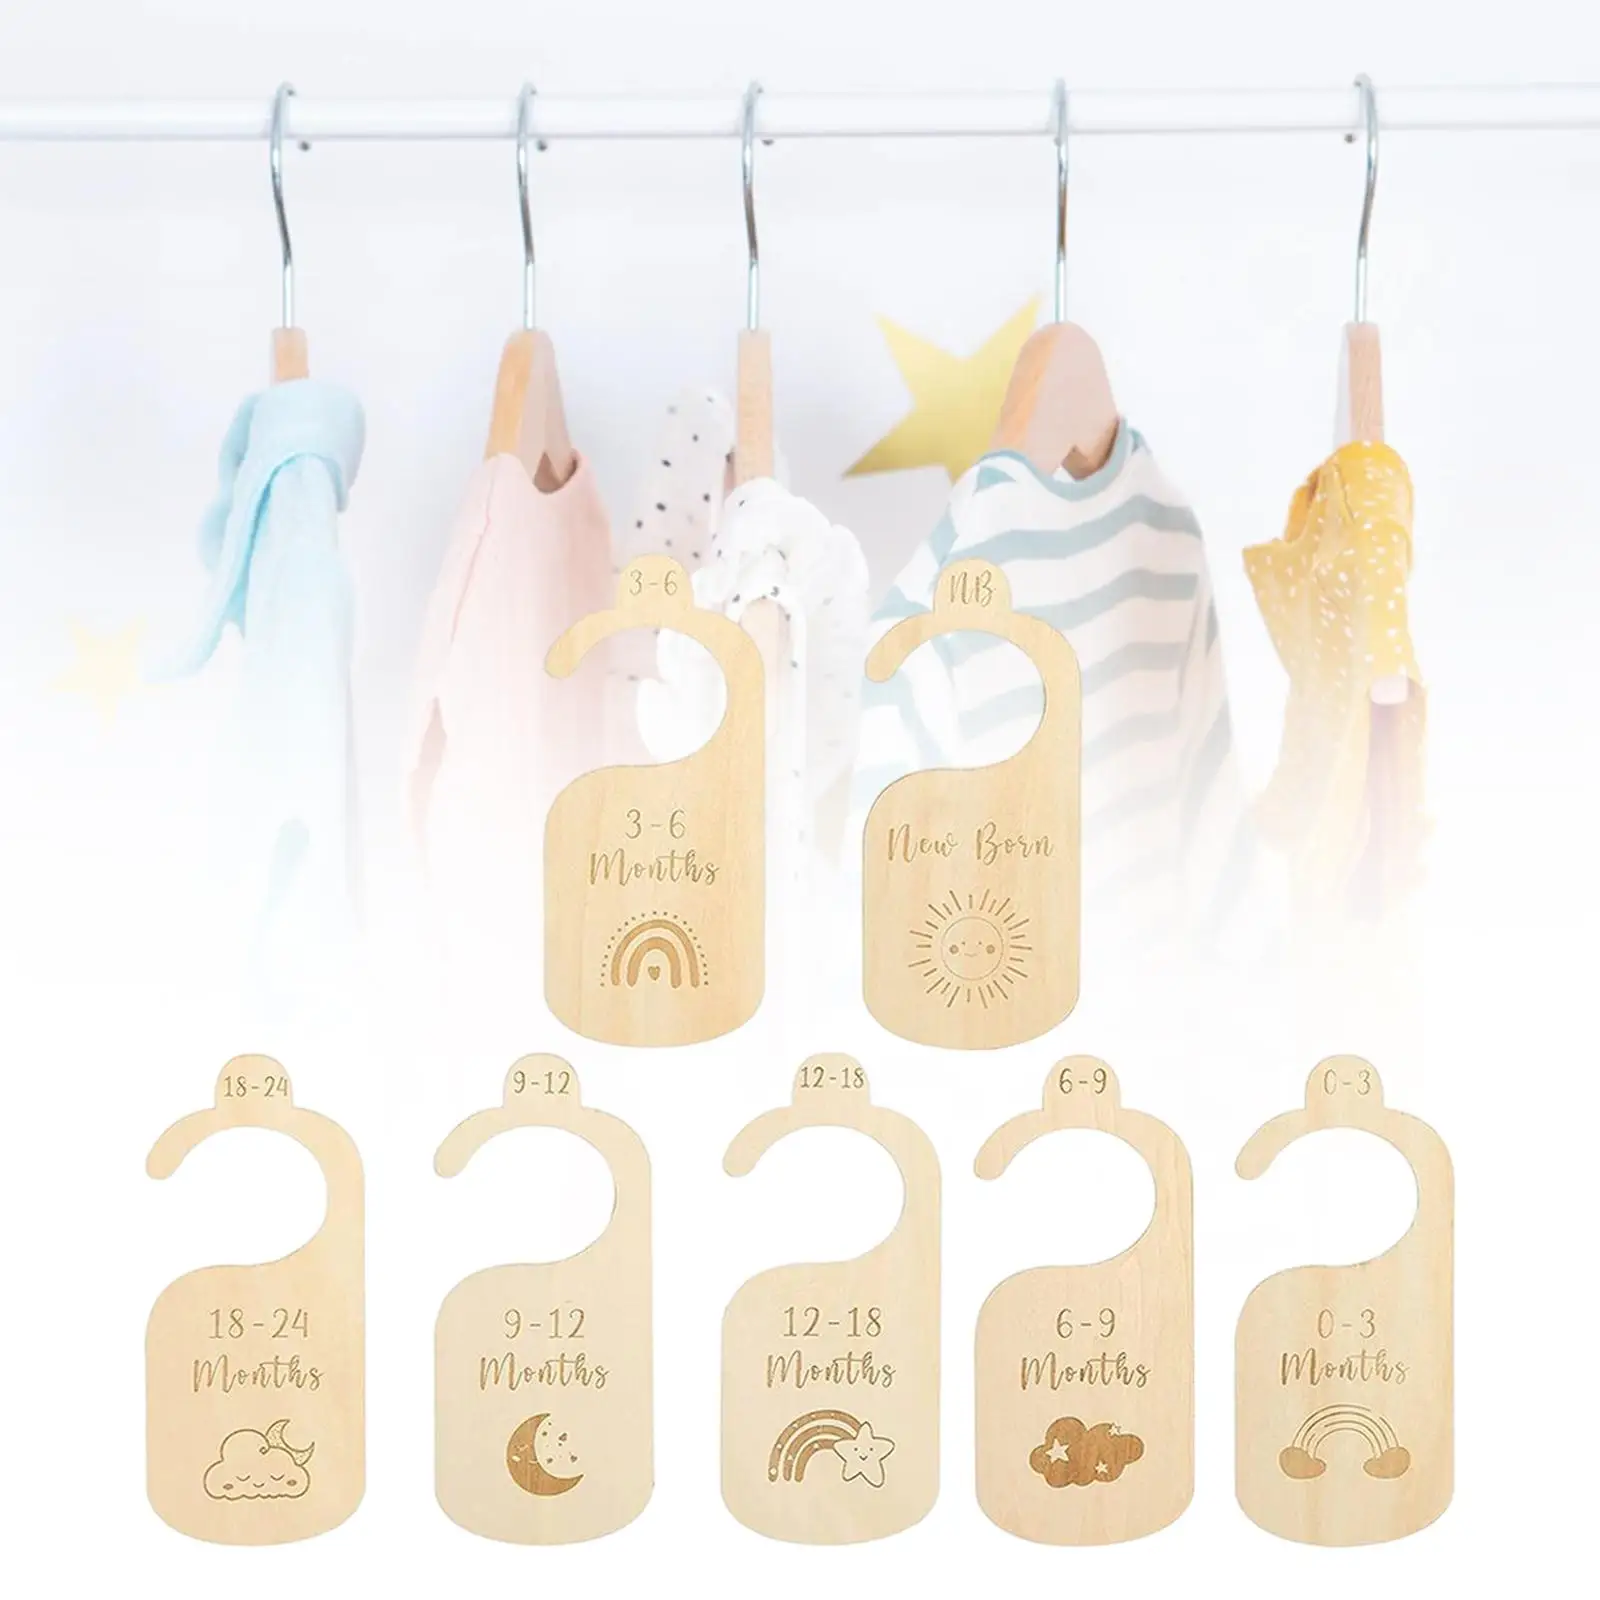 7x Wooden Closet Divider Nursery Clothes Organizers Hanging Clothes Dividers